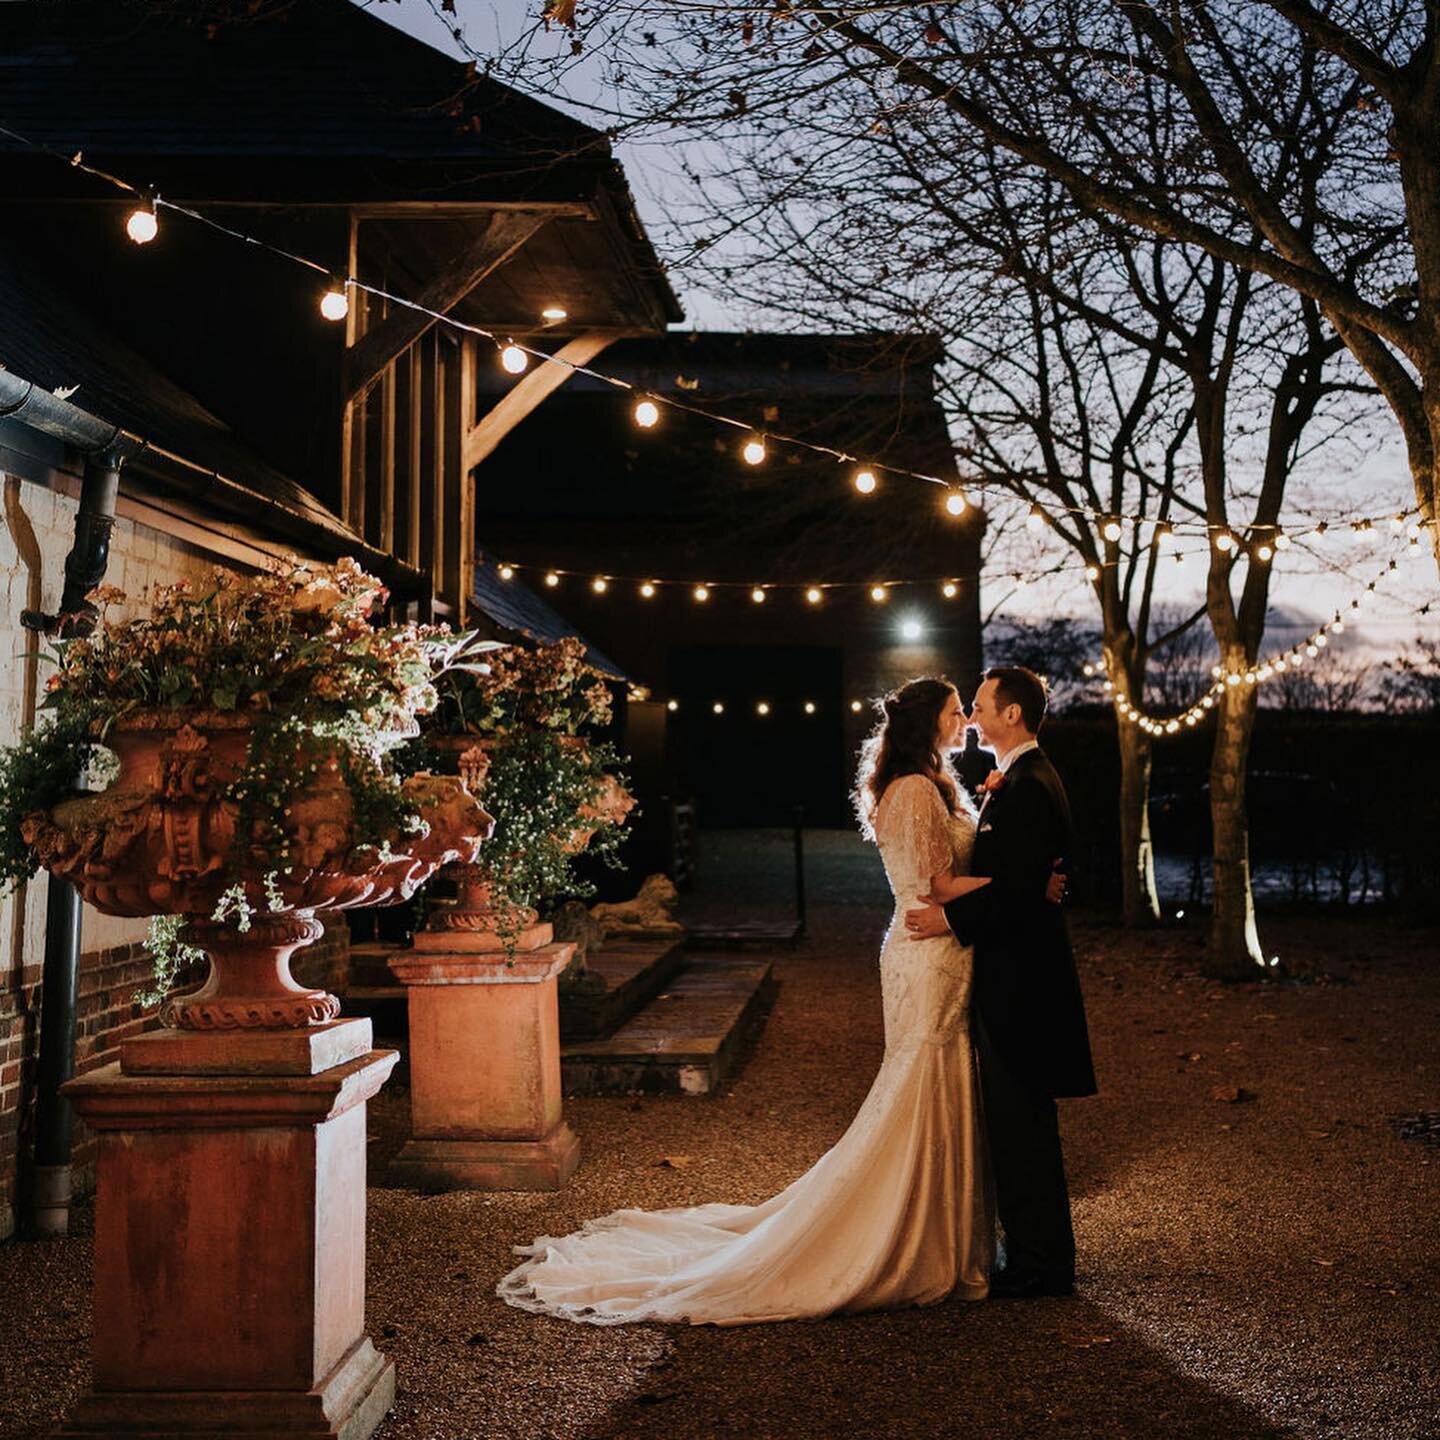 A little preview of L&amp;D gorgeous winter wedding at @burycourtbarn I&rsquo;m a total suck for winter light massive thank you to @katherine_and_her_camera for joining me to capture this amazing day!! #winterwedding #hampshireweddingphotography #